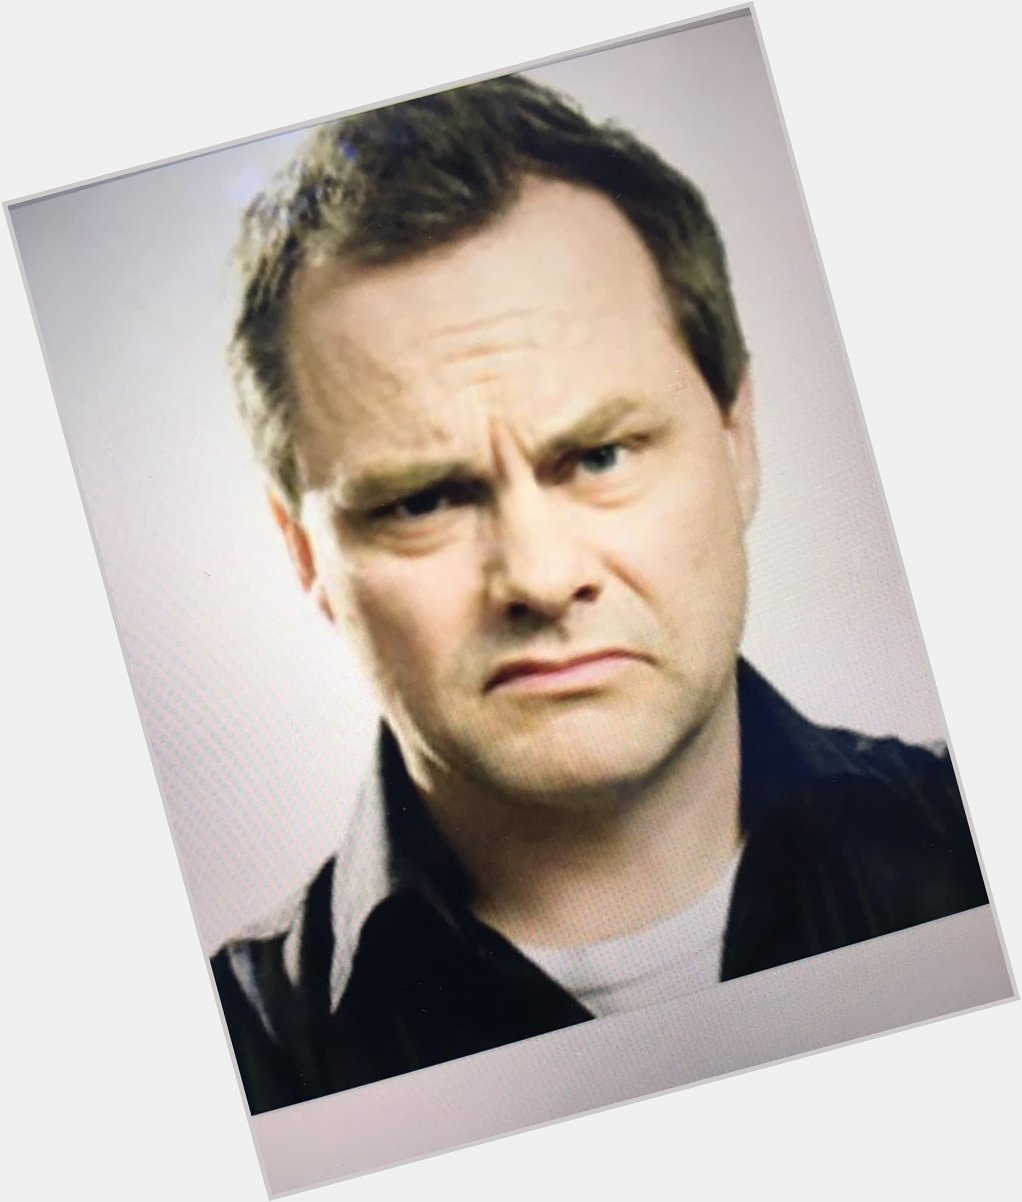 56 today, but might \Happy Birthday\ to \Jack Dee\ be an oxymoron? 